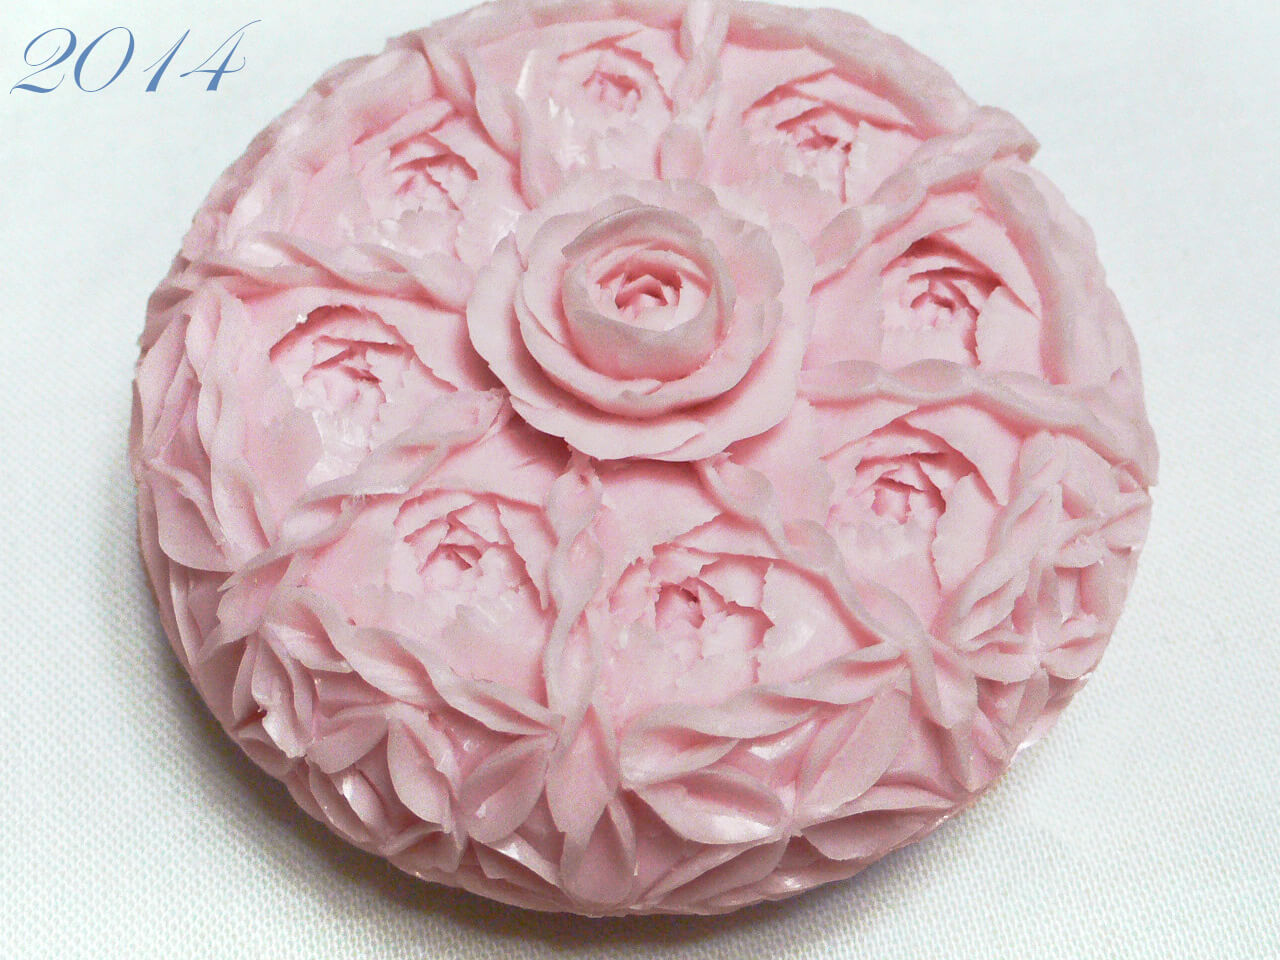 soap carving 2014